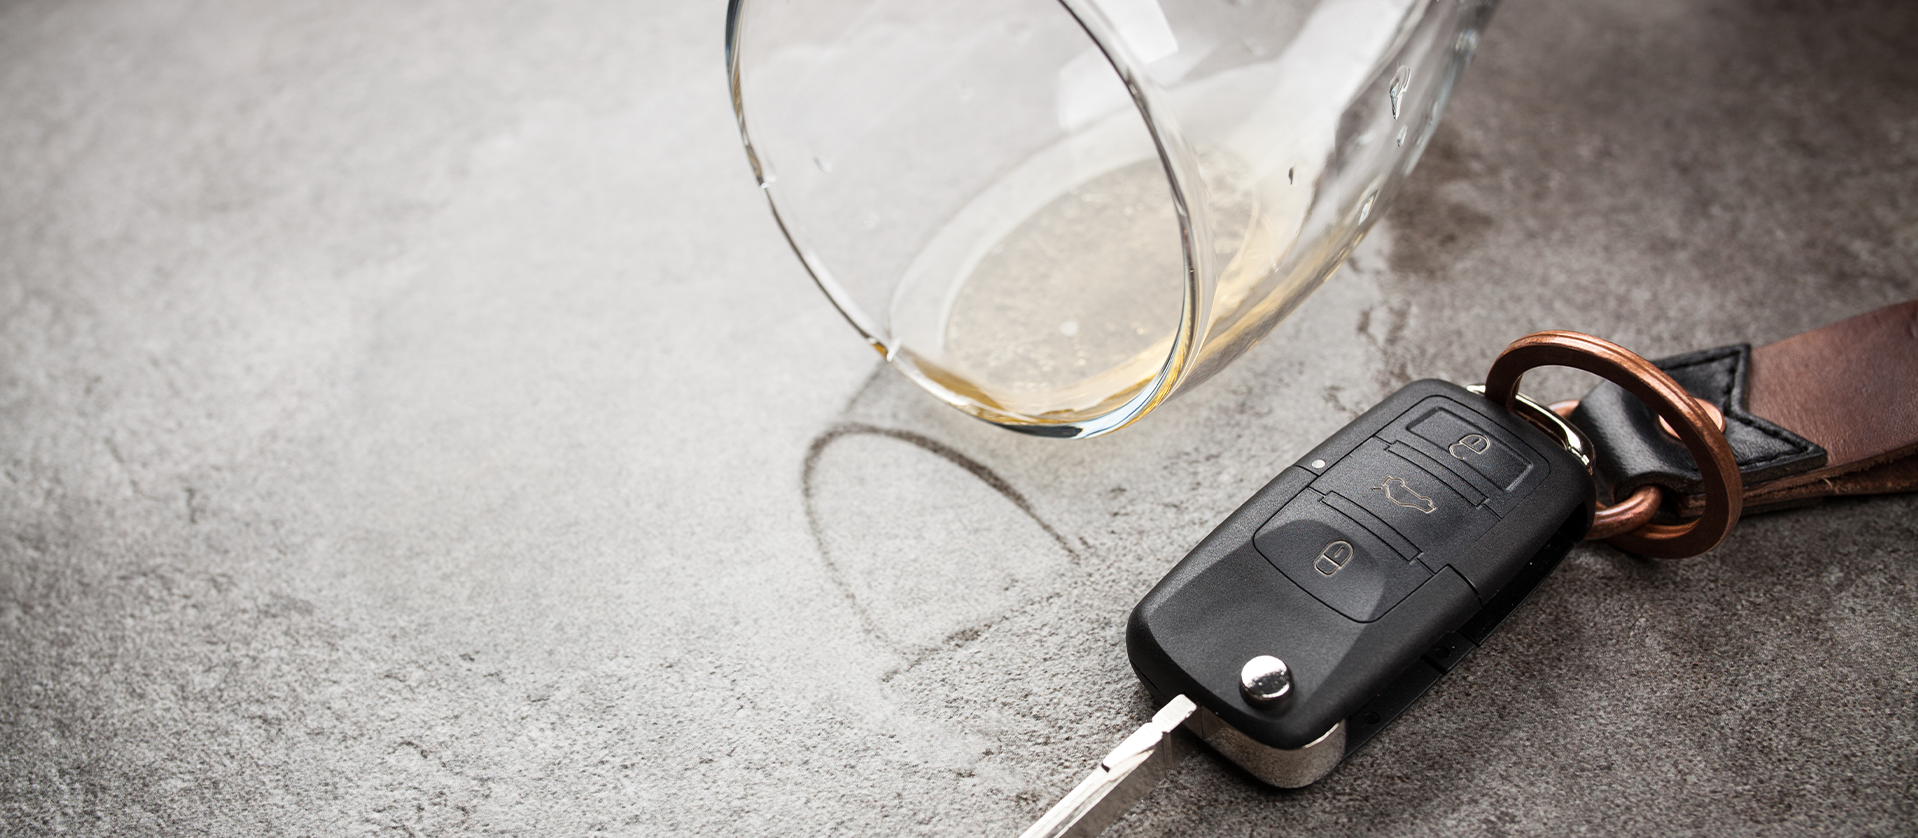 An overturned glass with a small amount of alcohol next to car keys on a concrete surface, suggesting the dangers of drinking and driving.